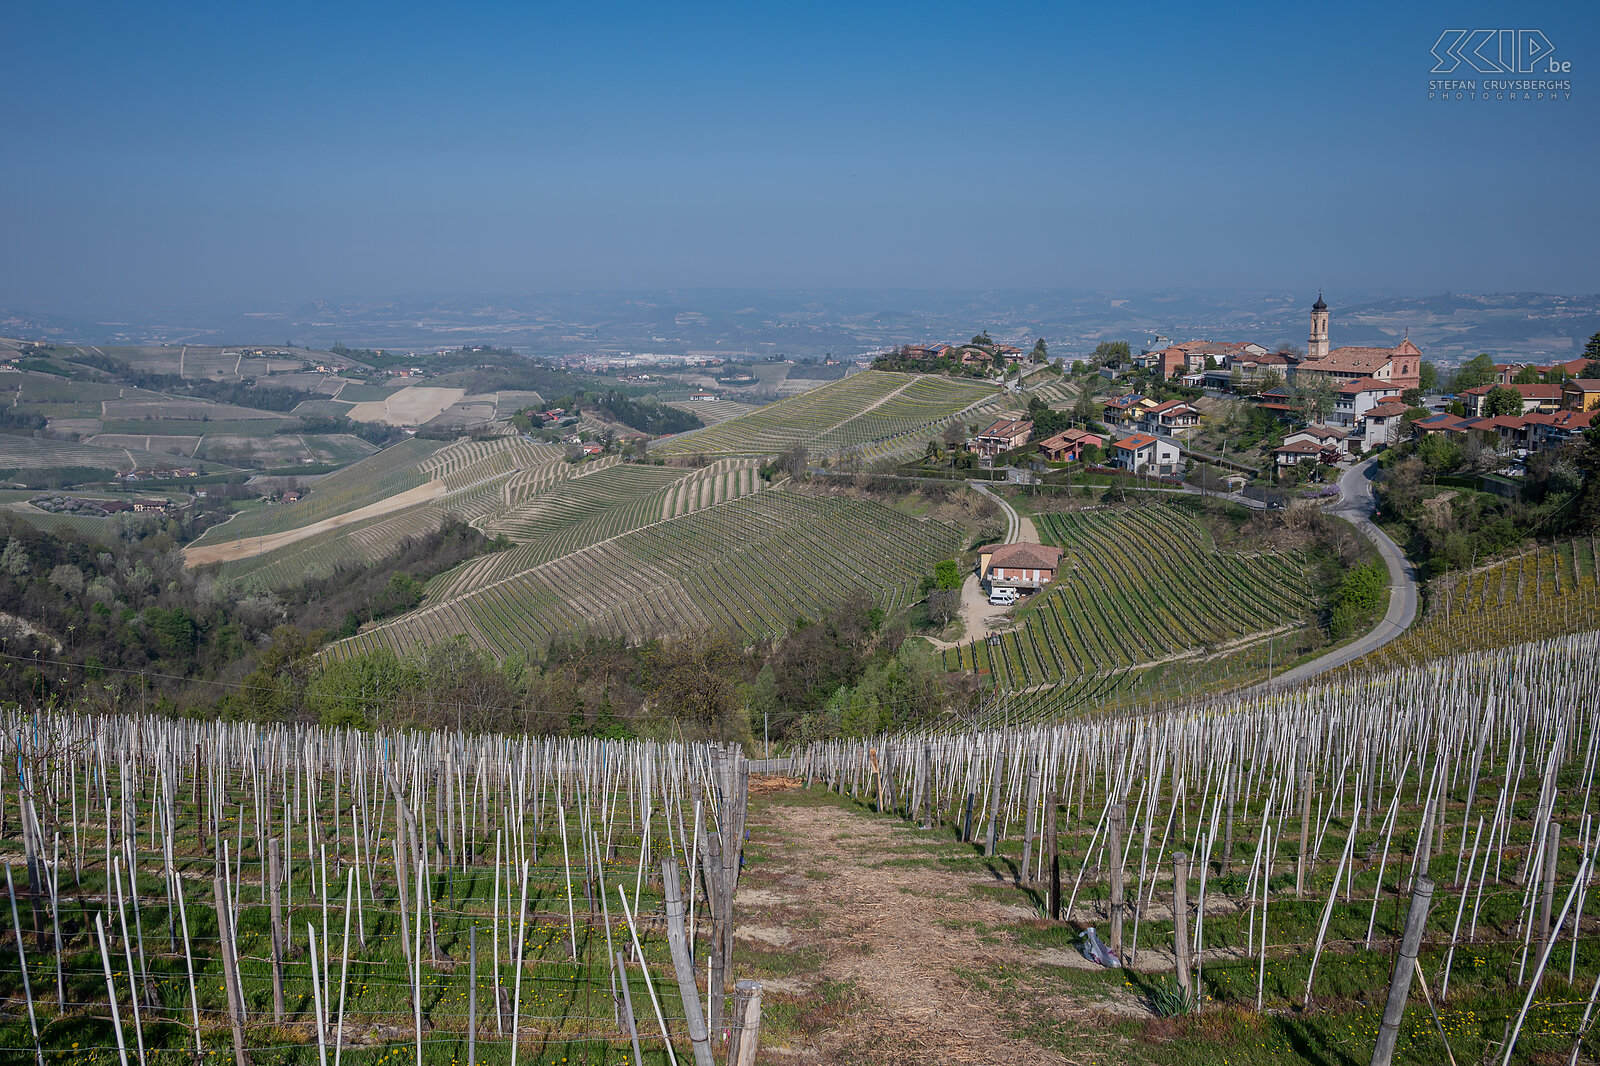 Treiso Treiso is with its 410m the highest village of the Barbaresco area. From the village you have a beautiful view over the rolling hills. Stefan Cruysberghs